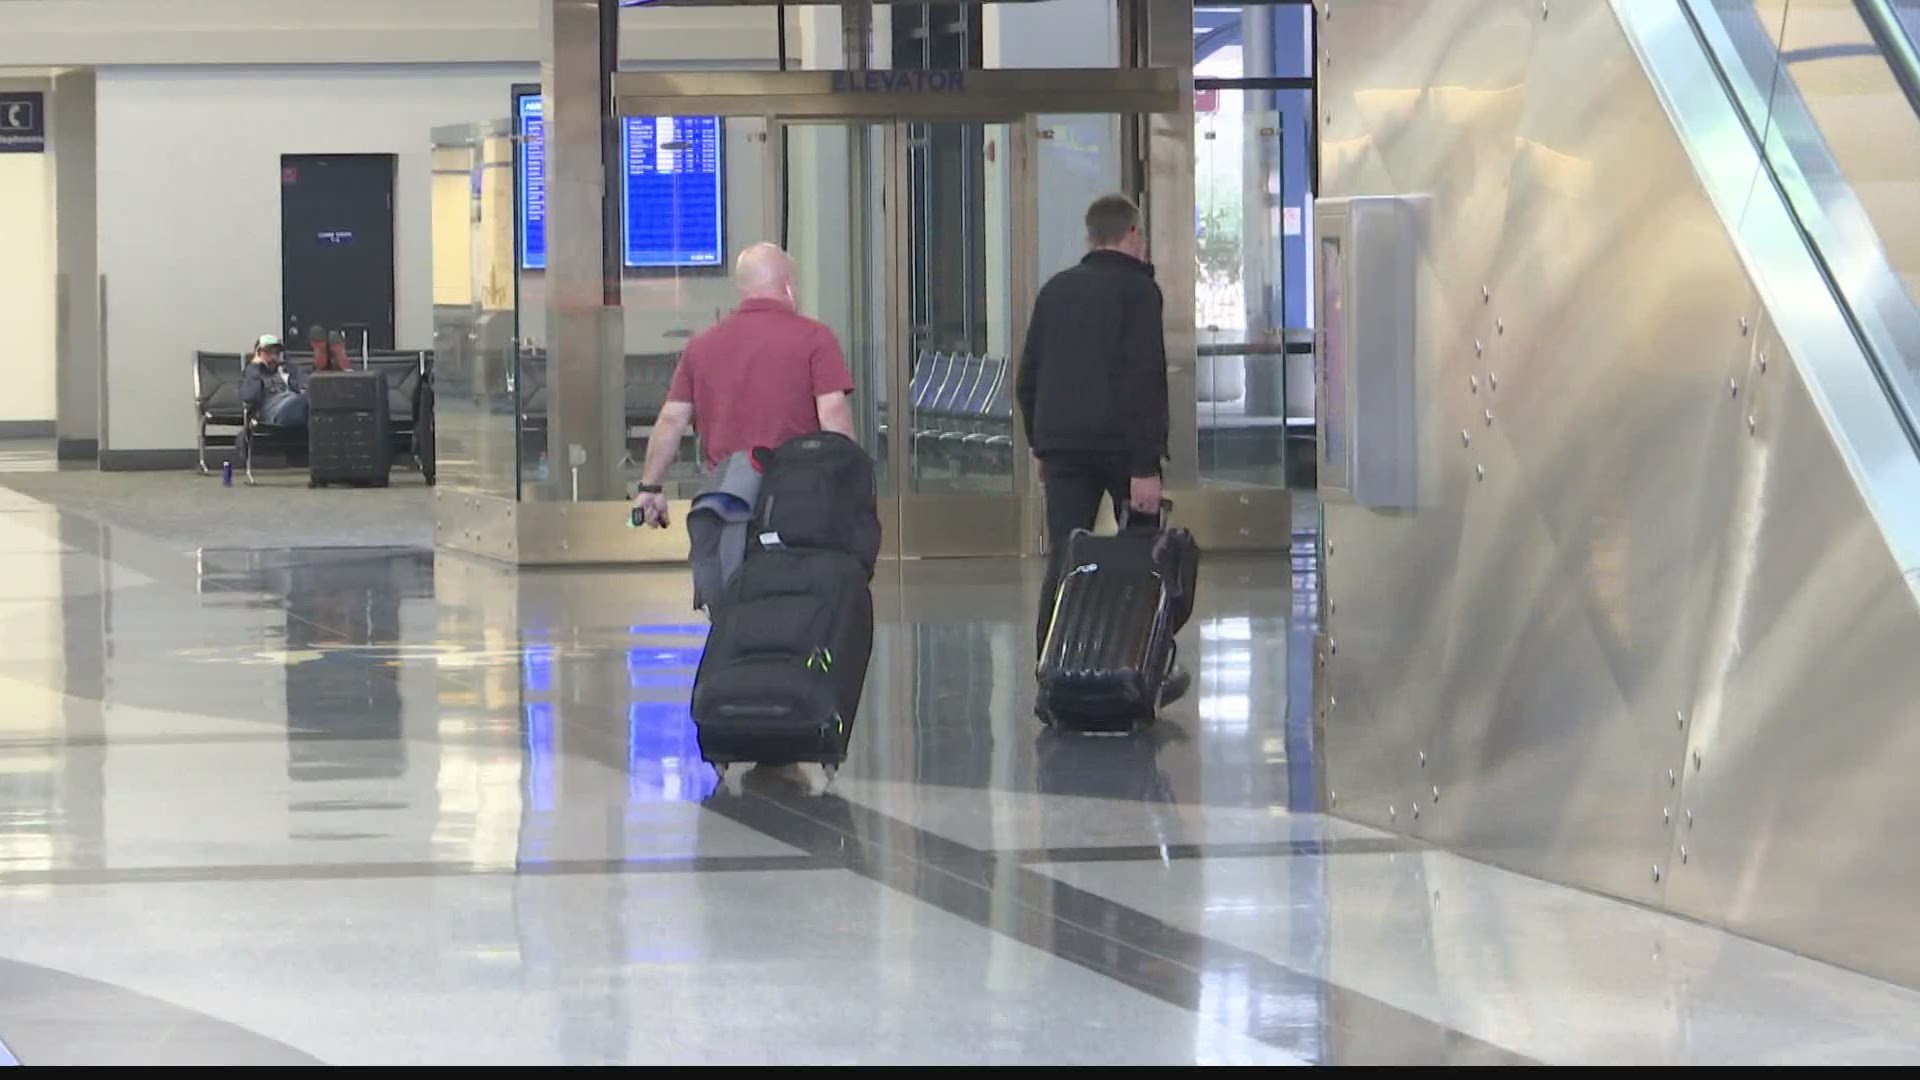 The airport says they are projecting to lose 75% of expected revenue in the next three months.